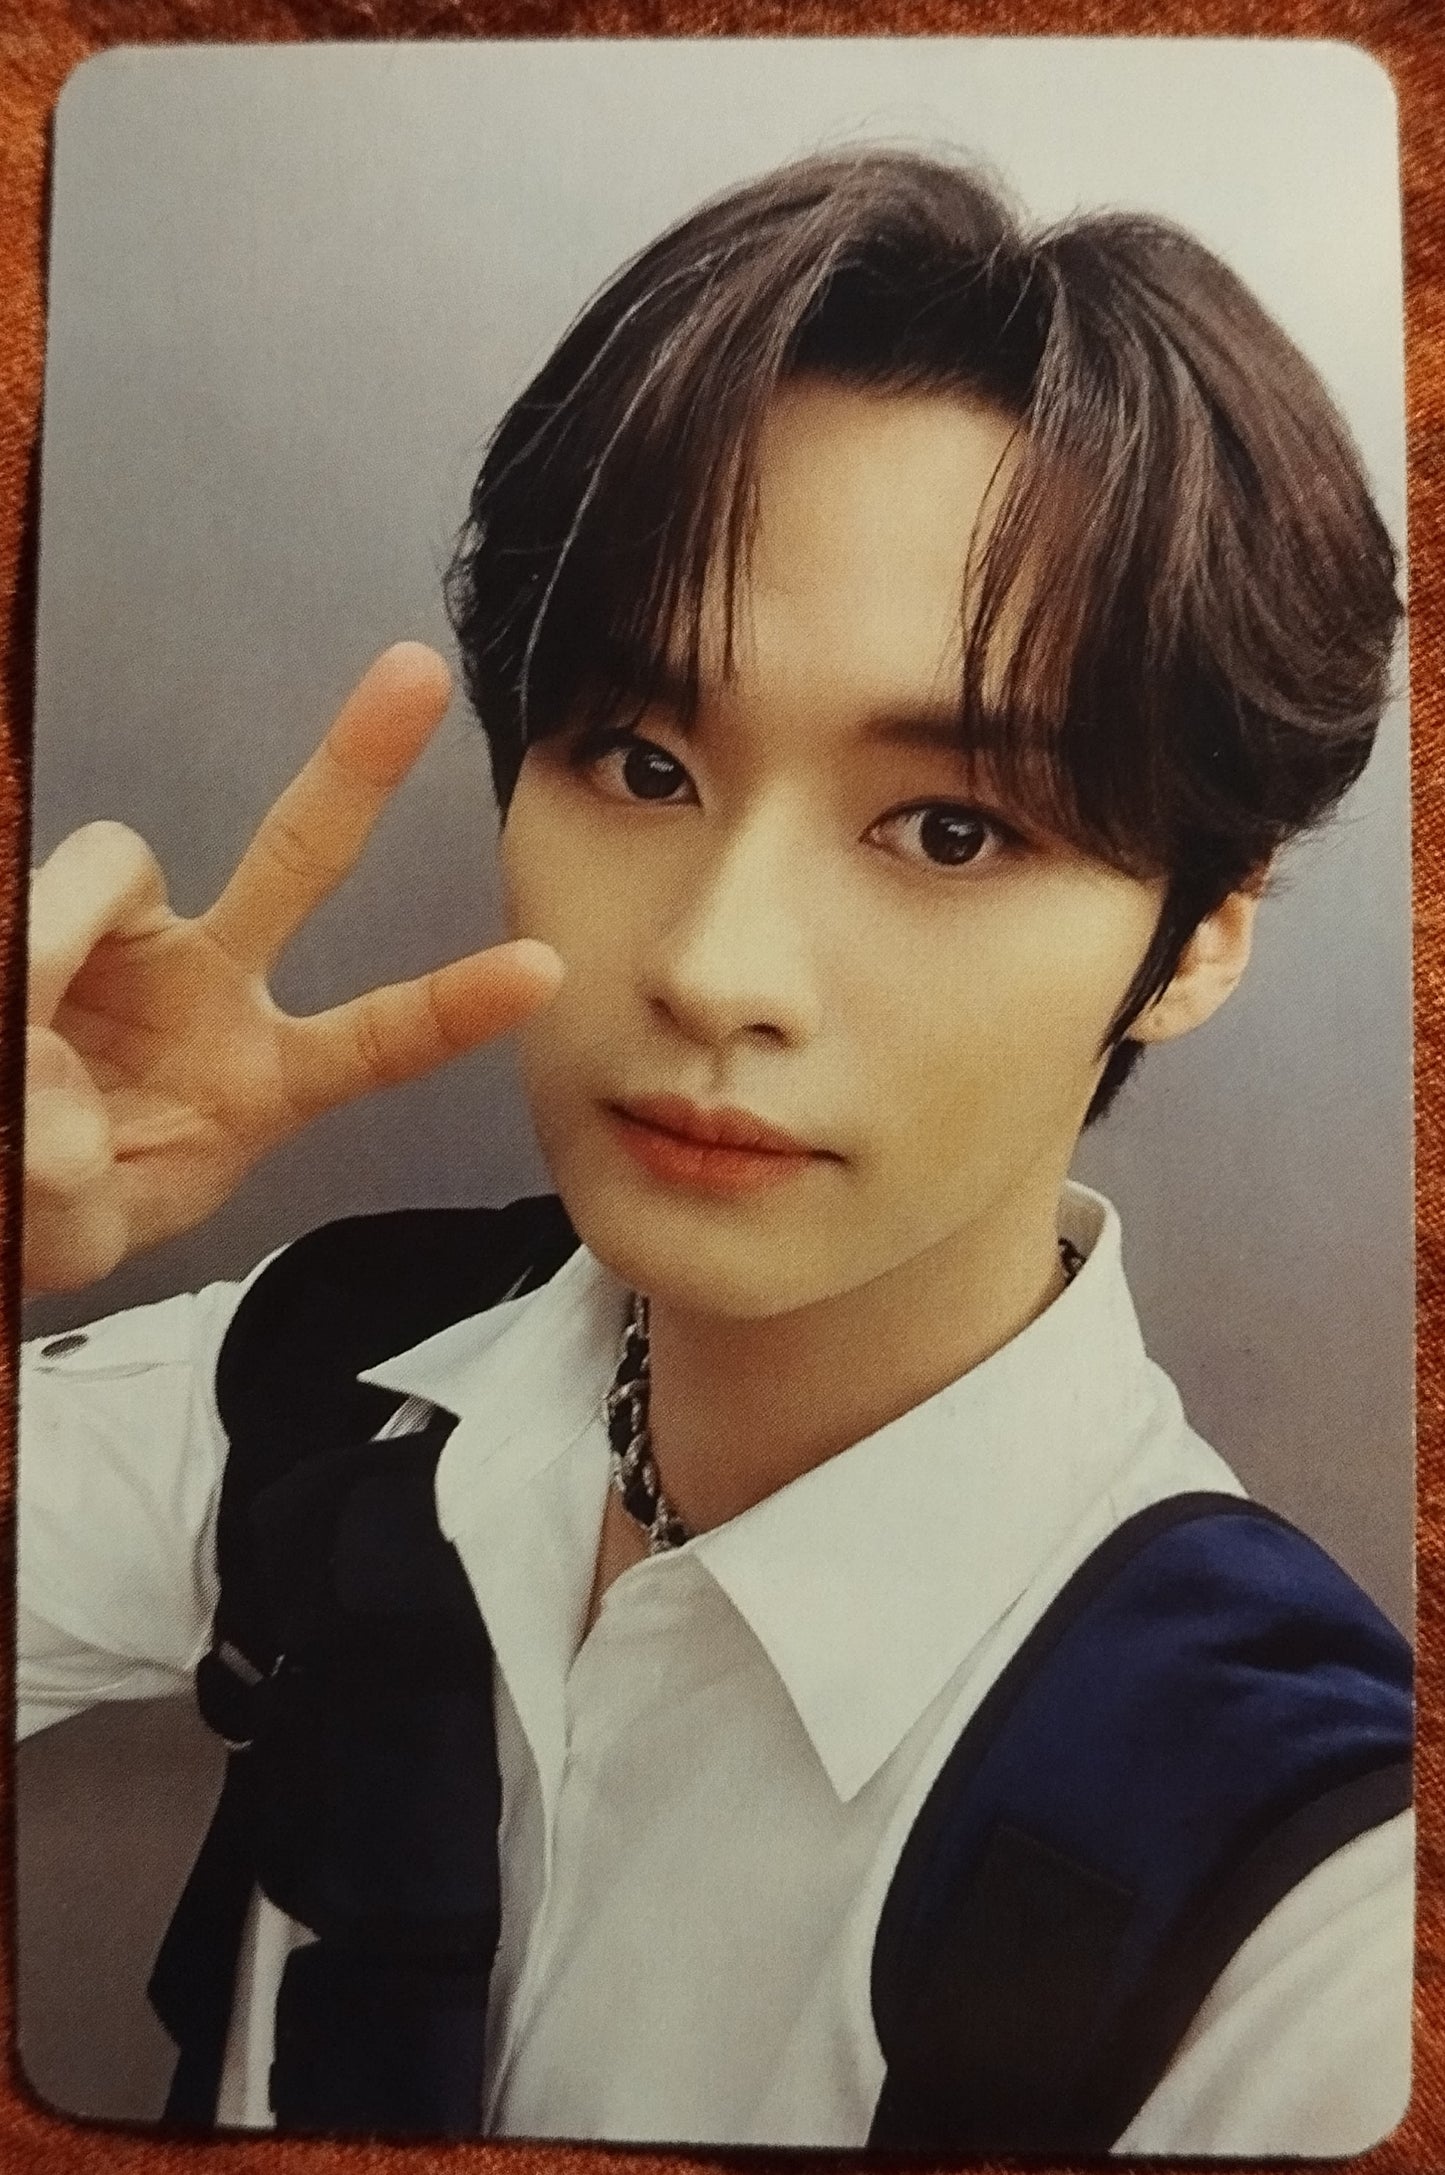 Photocard  STRAYKIDS  The sound Japan first album  Lee know